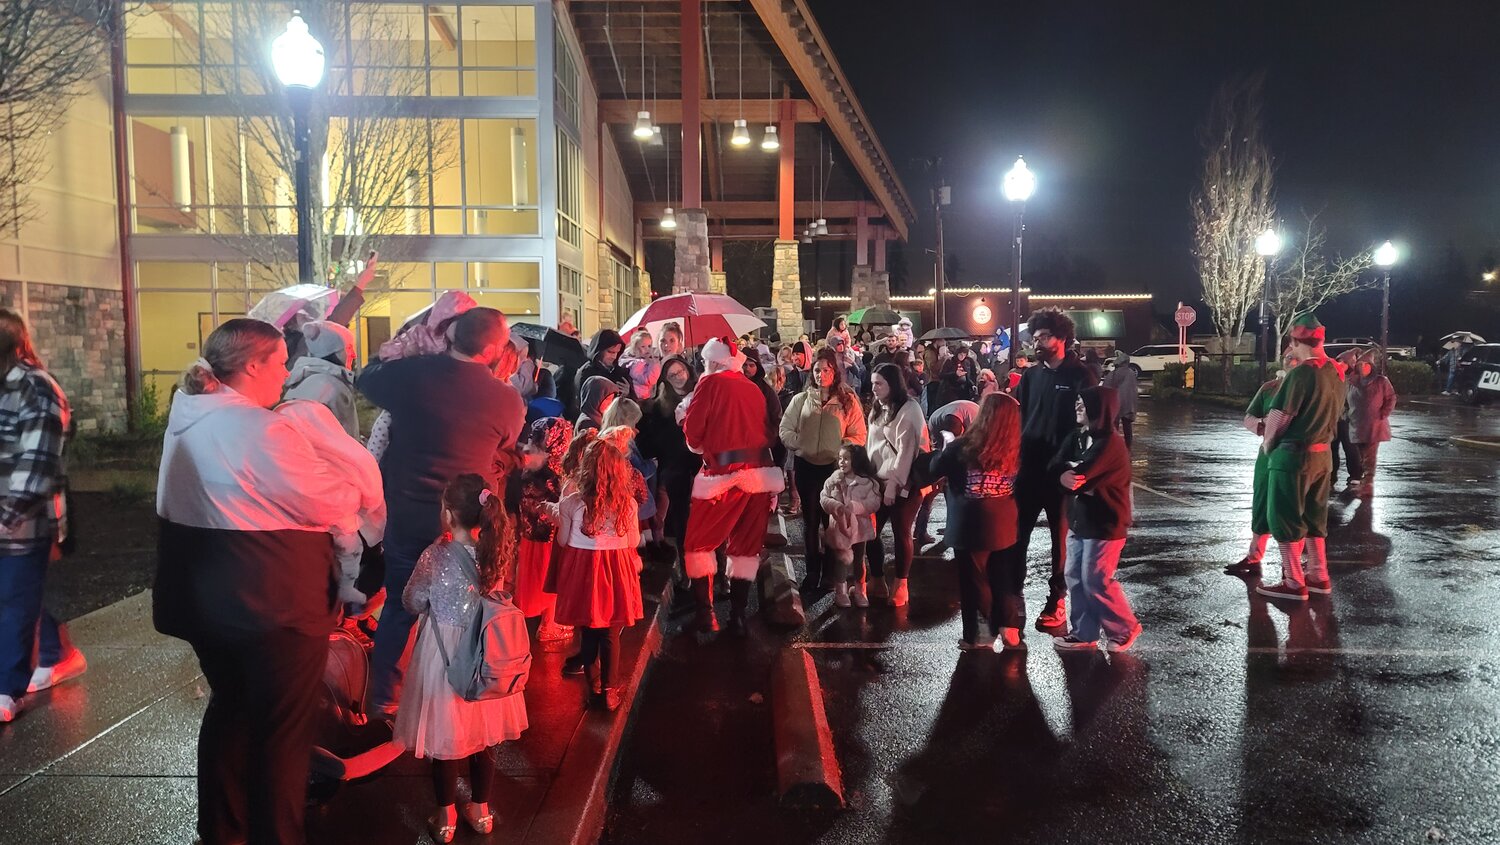 Santa Claus is illuminated in red on his ride, a Clark County Fire District 3 truck, to the Battle Ground Community Center. Mrs. Claus rode in with the Battle Ground Police Department for the tree-lighting ceremony on Friday, Dec. 1.